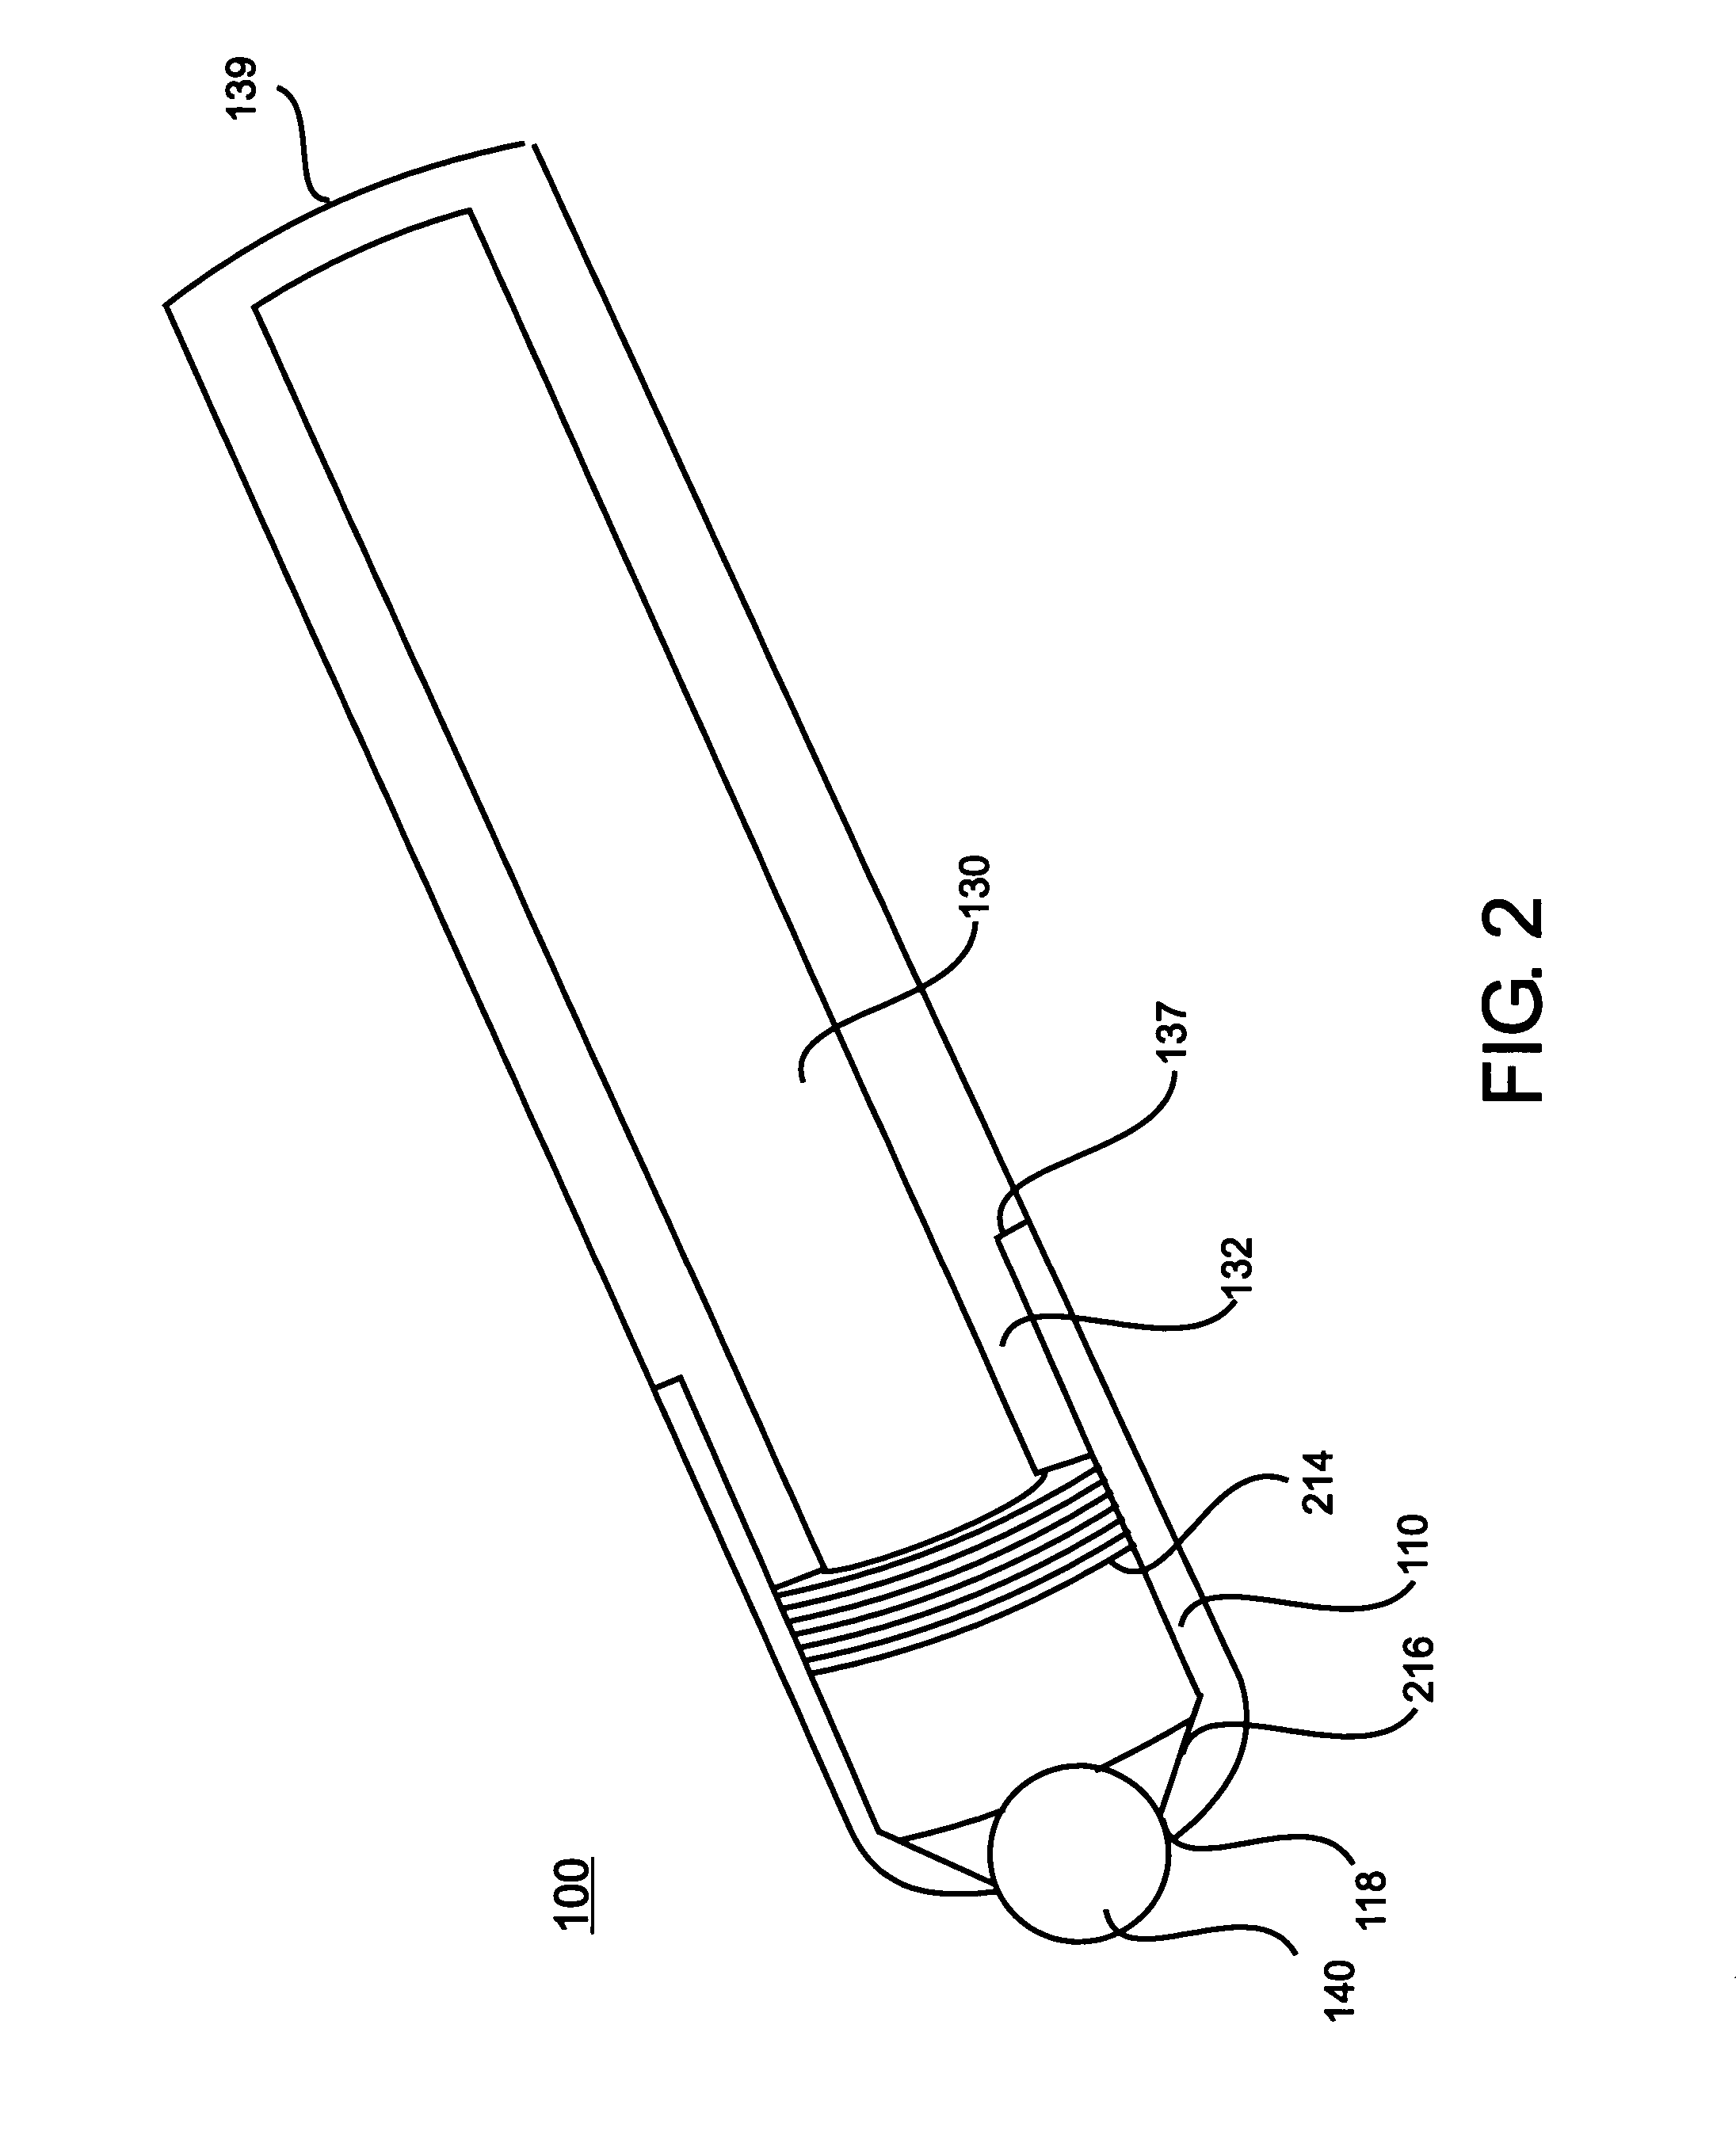 Optical immersion probe incorporating a spherical lens